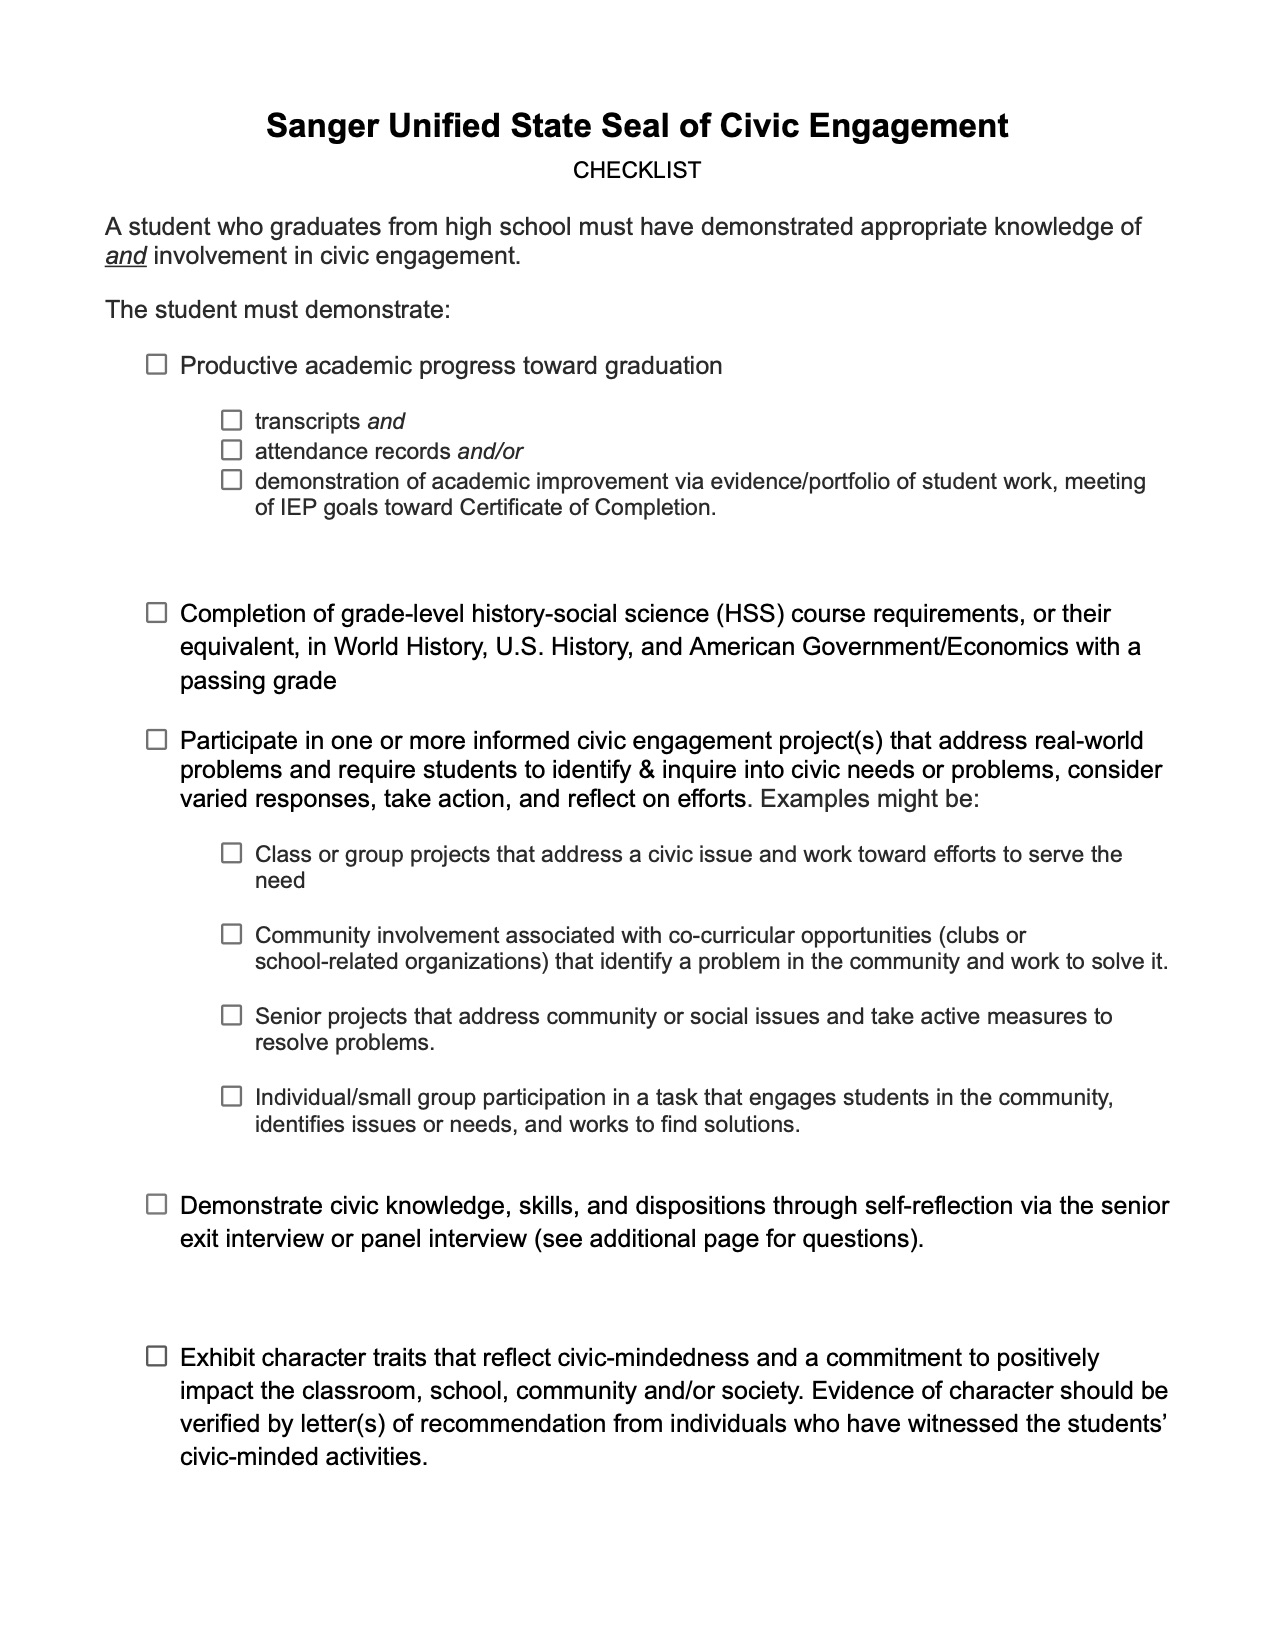 State Seal of Civic Engagement Checklist